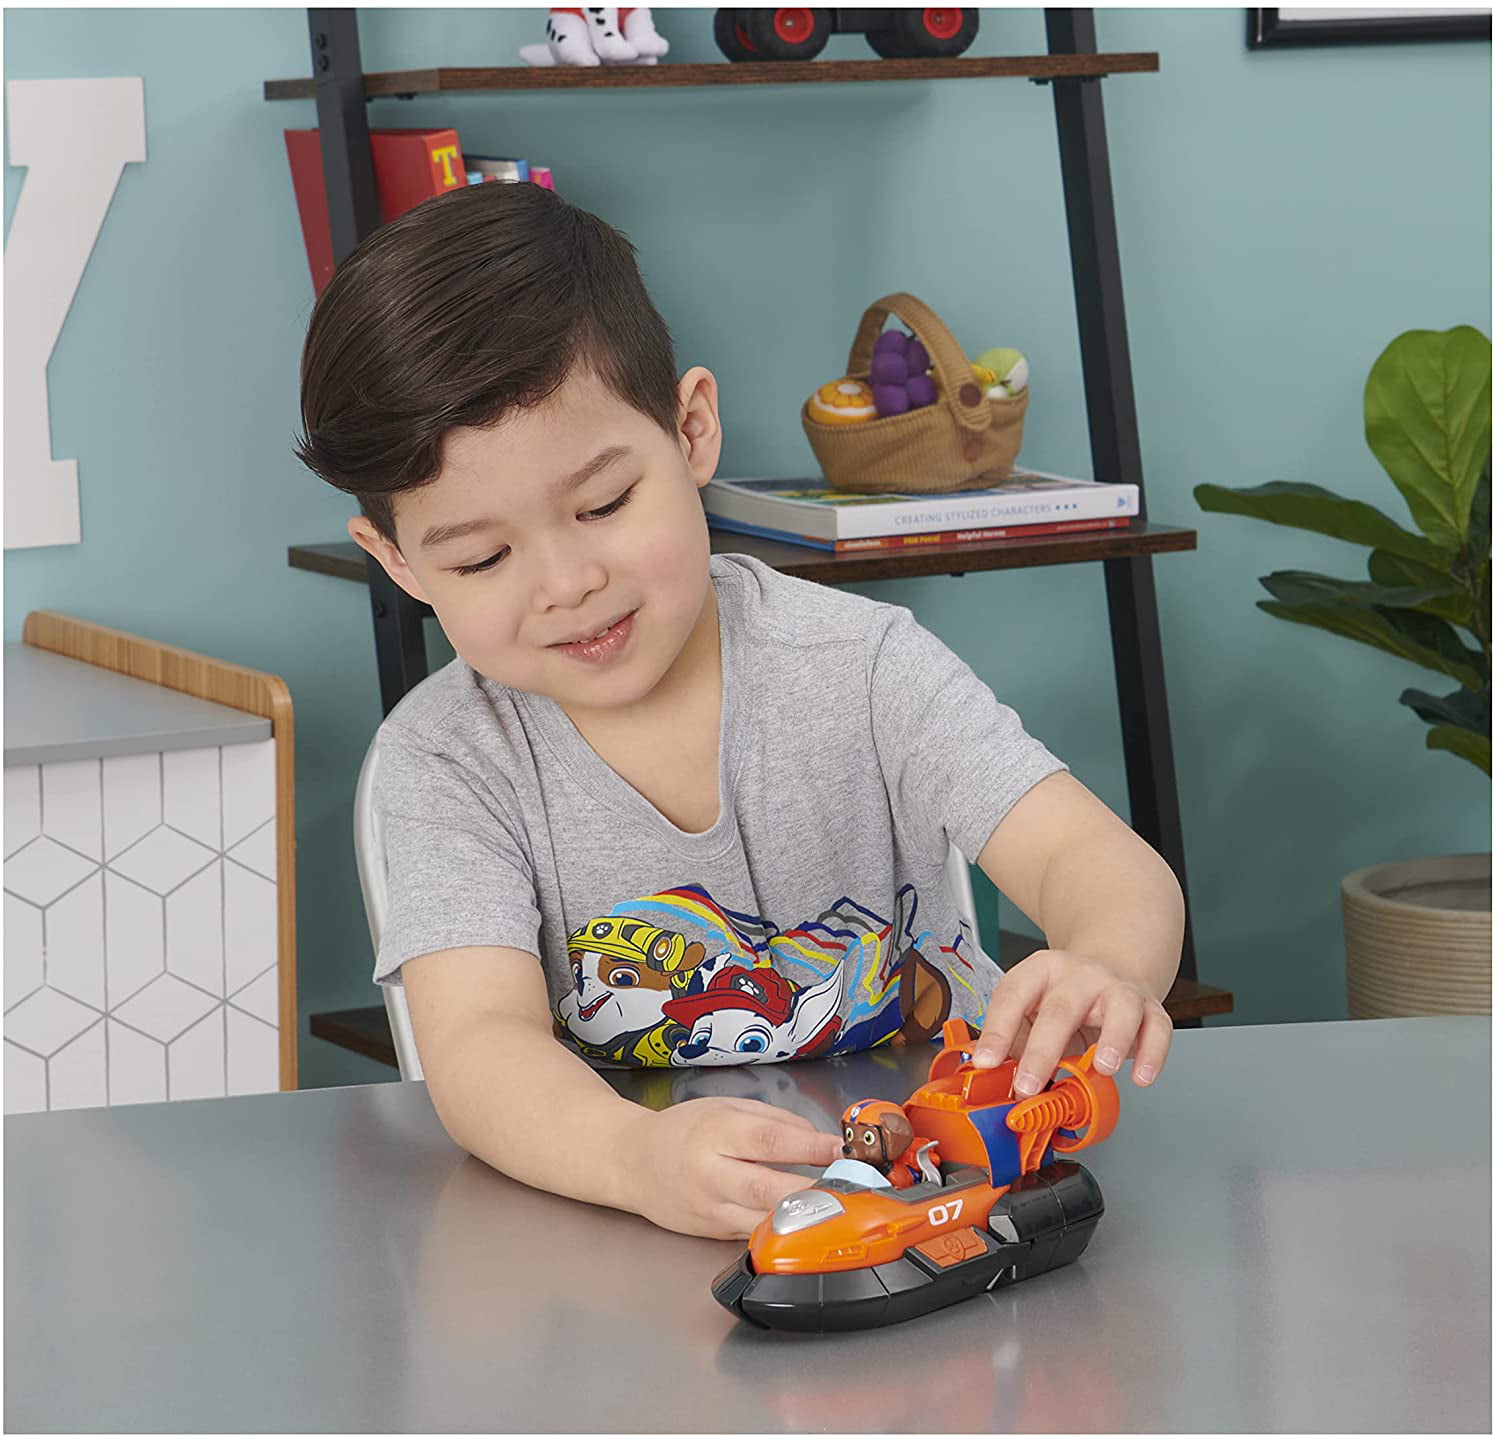 Paw Patrol, Zuma's Deluxe Movie Transforming Toy Car with 